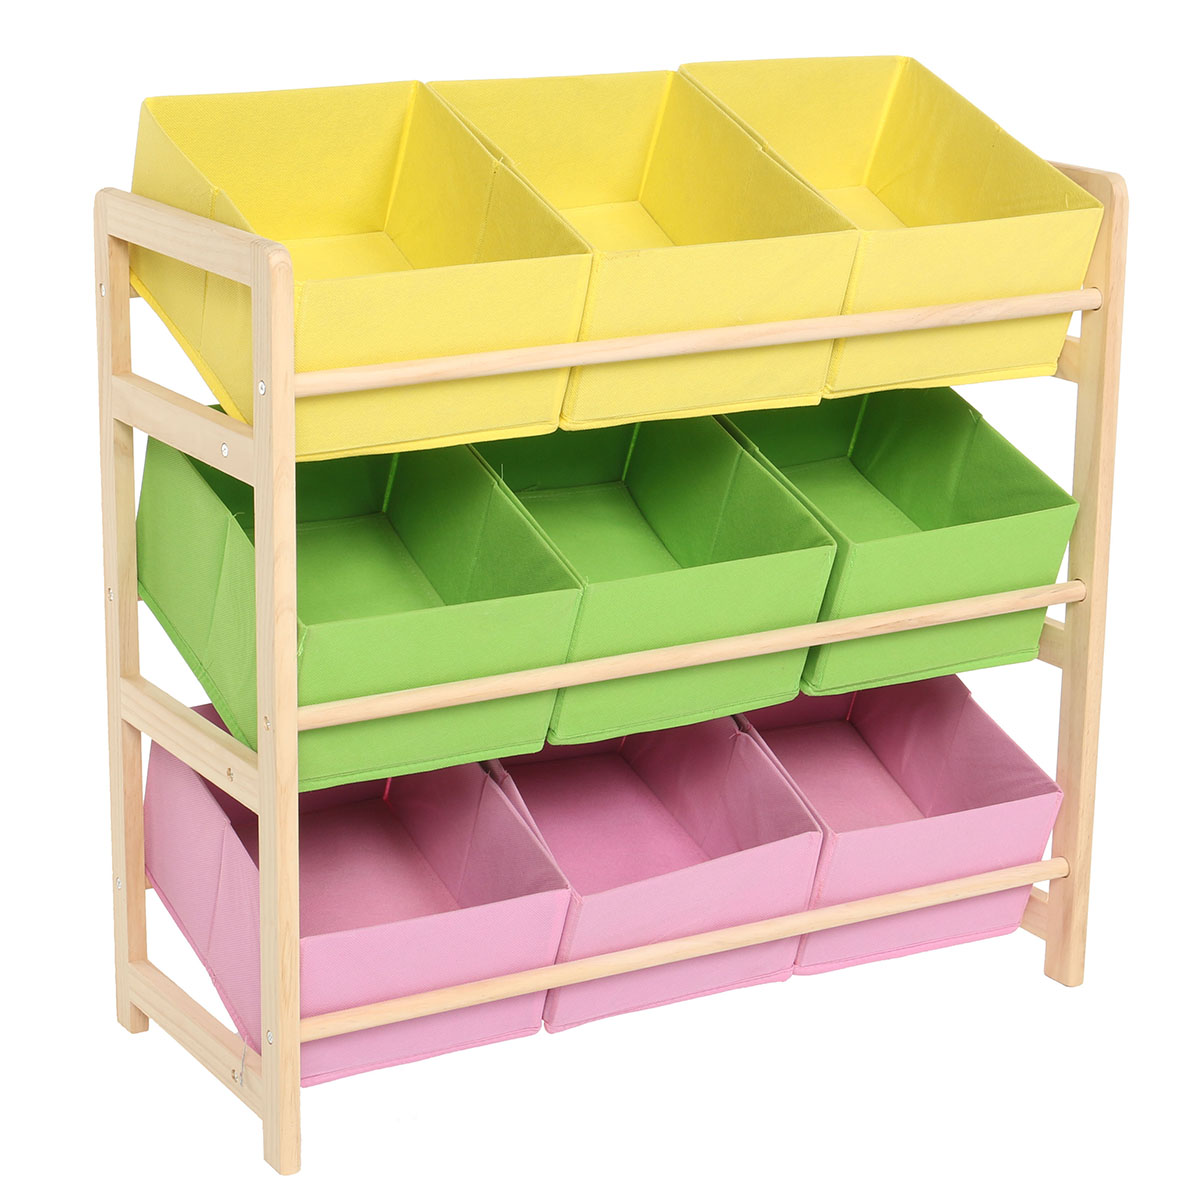 66309CM-Yellow-Pink-Green-Solid-Wood-Childrens-Toy-Rack-Storage-Rack-Toy-Rack-1754652-9